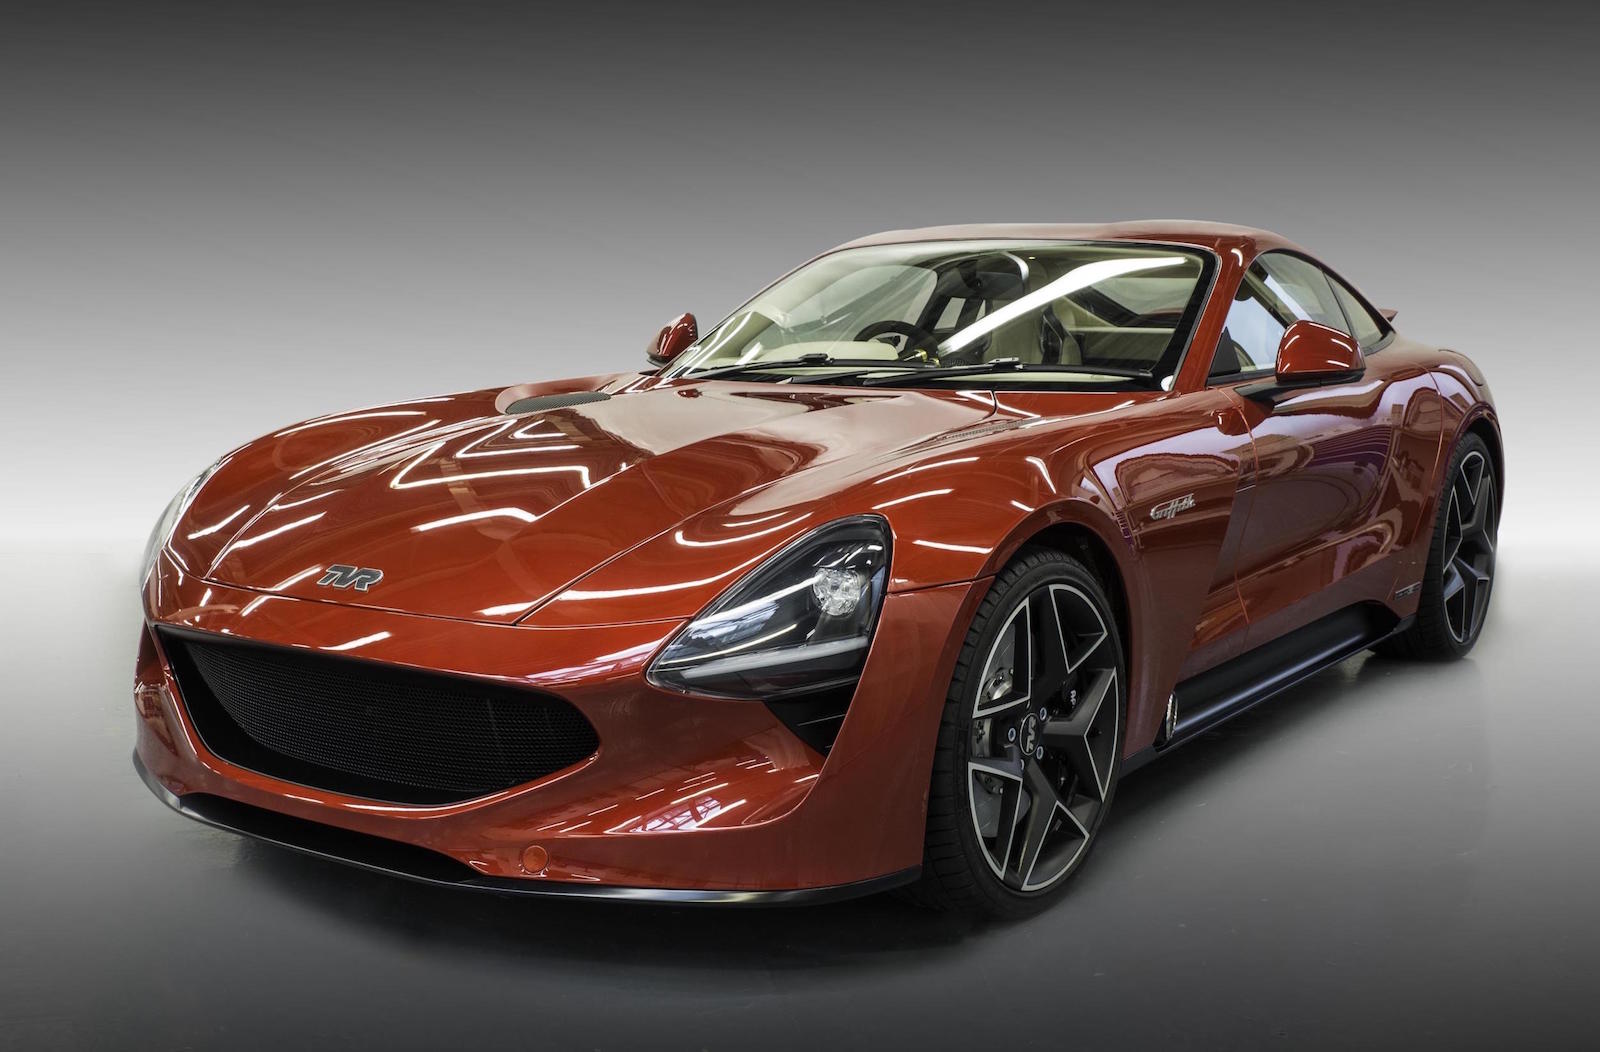 2018 TVR Griffith officially revealed